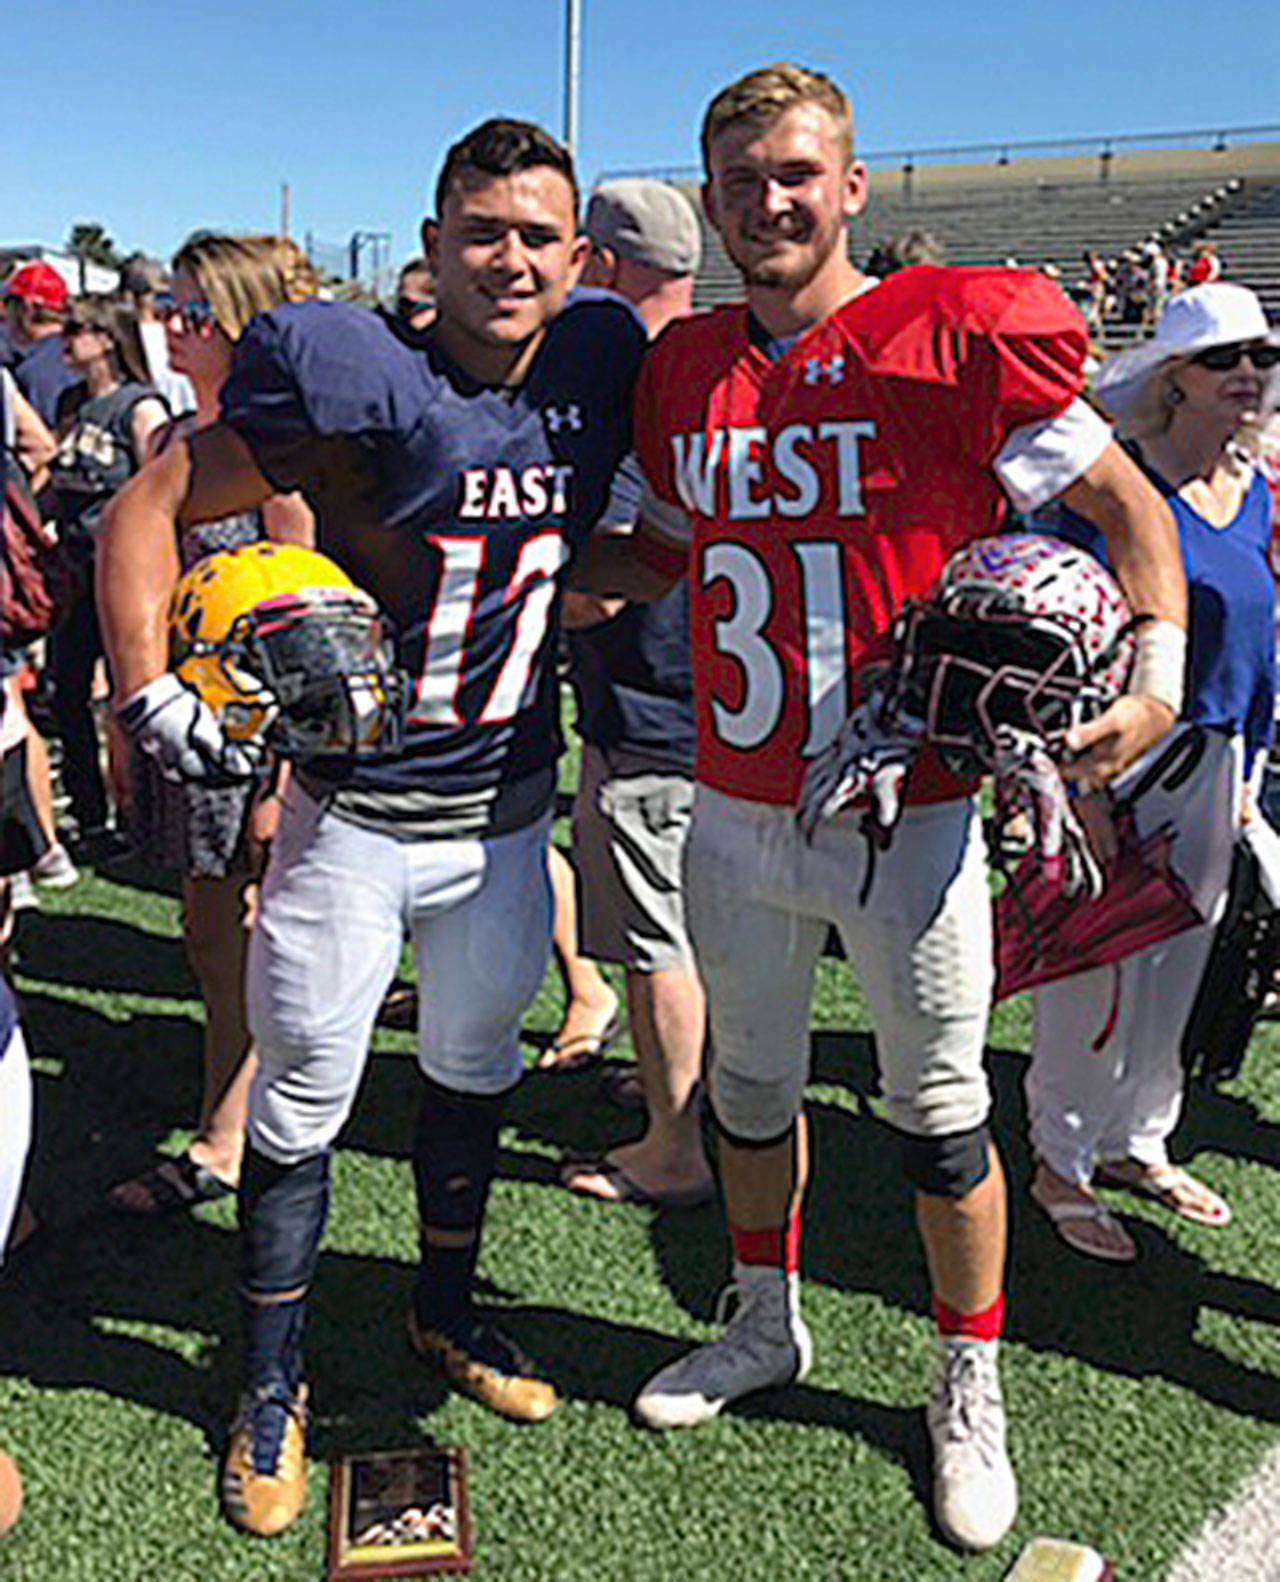 Aberdeen’s Kylan Touch, left, and Montesano’s Carson Klinger pose for a photo after the conclusion of the 24th Annual East-West Earl Barden All-Star Classic on Saturday in Yakima. (Photo courtesy of Milinda Poole)